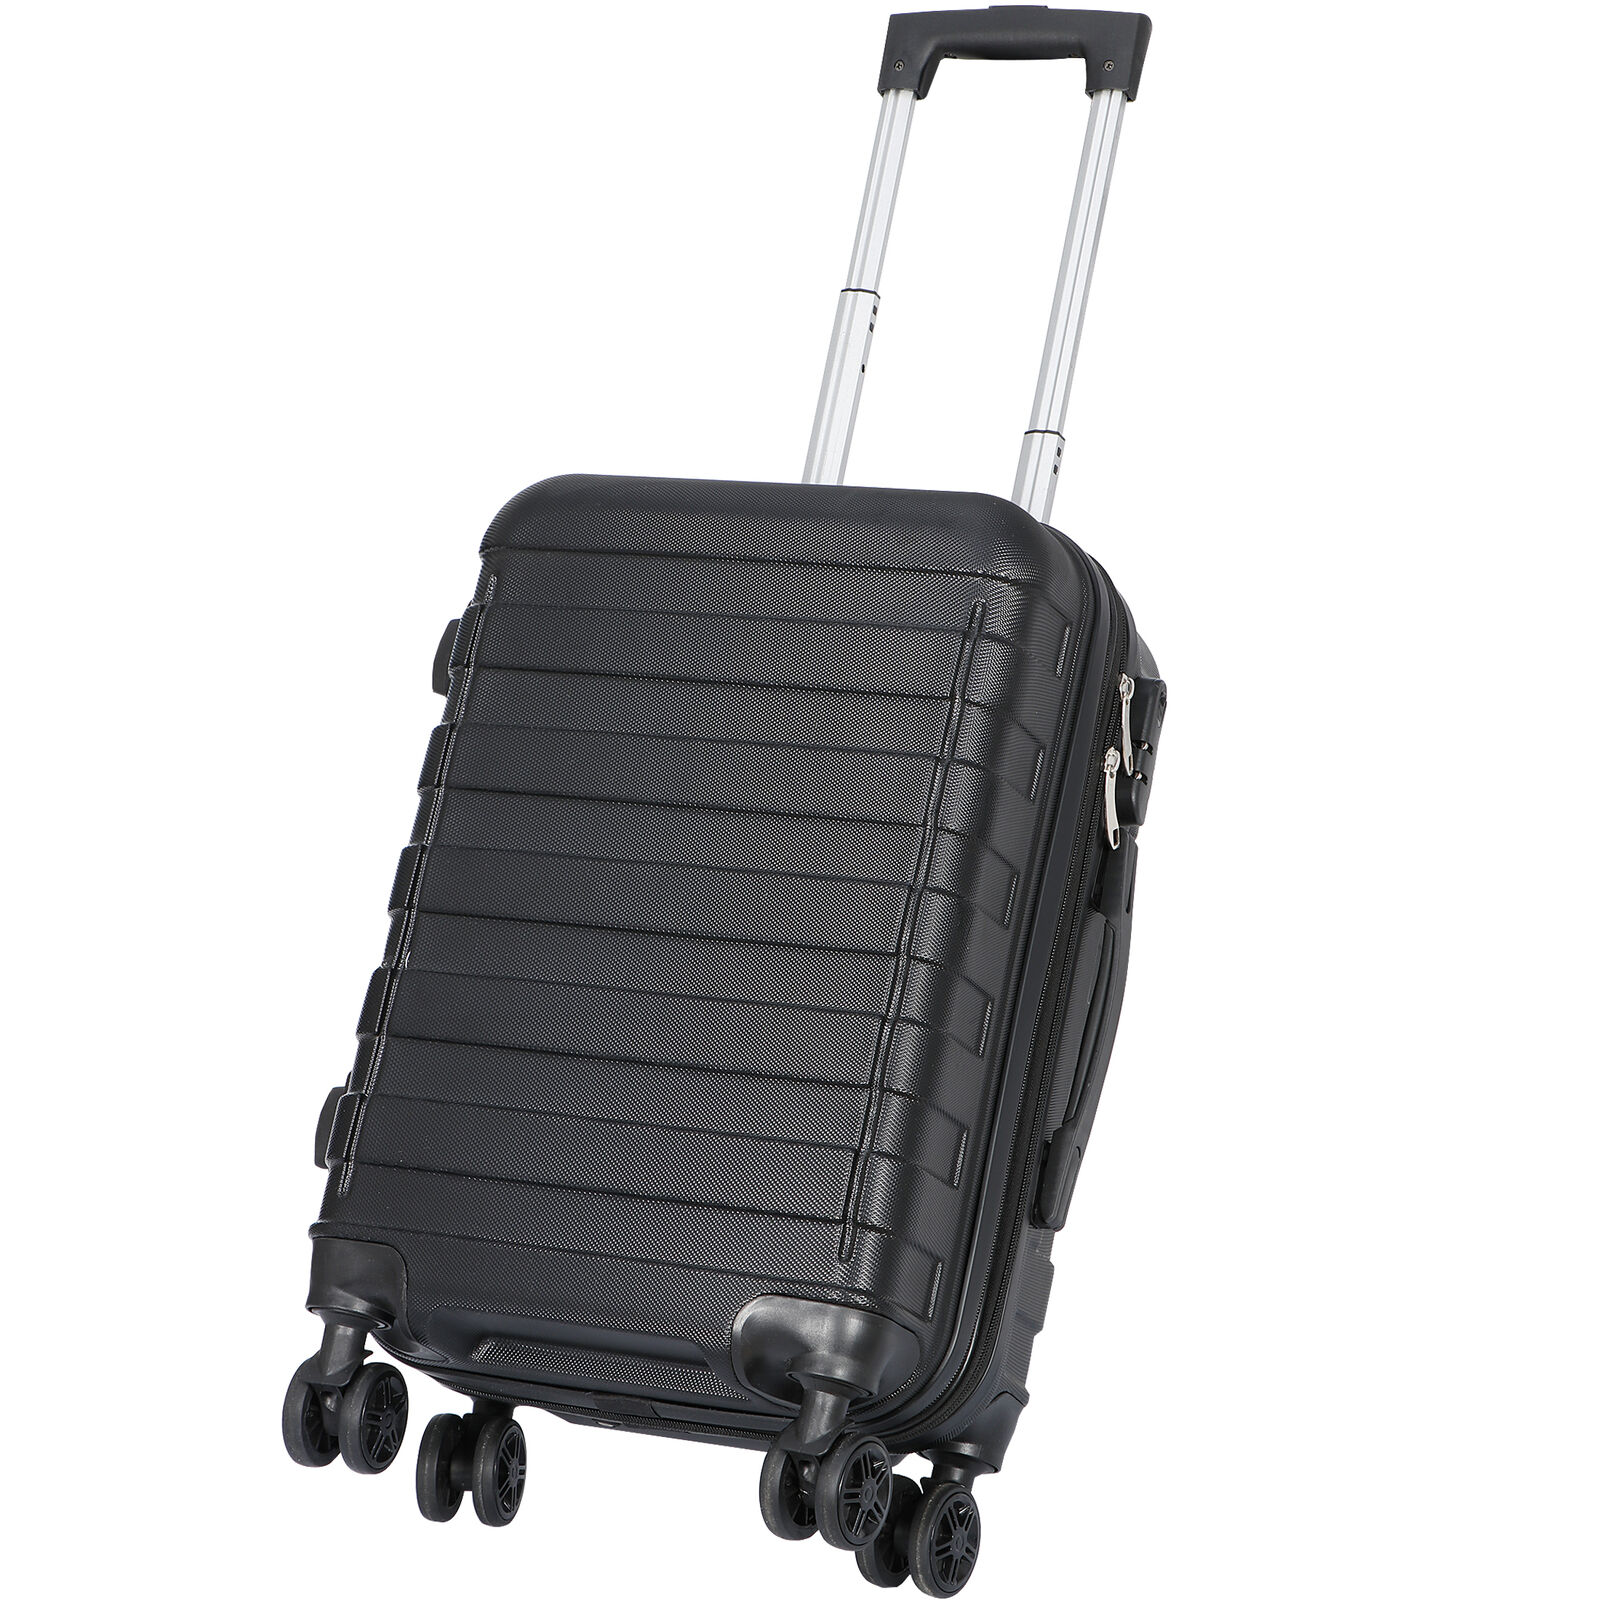 Segawe 22" Hardside Expandable Carry-On Suitcase Luggage with Spinner Wheels Vacation